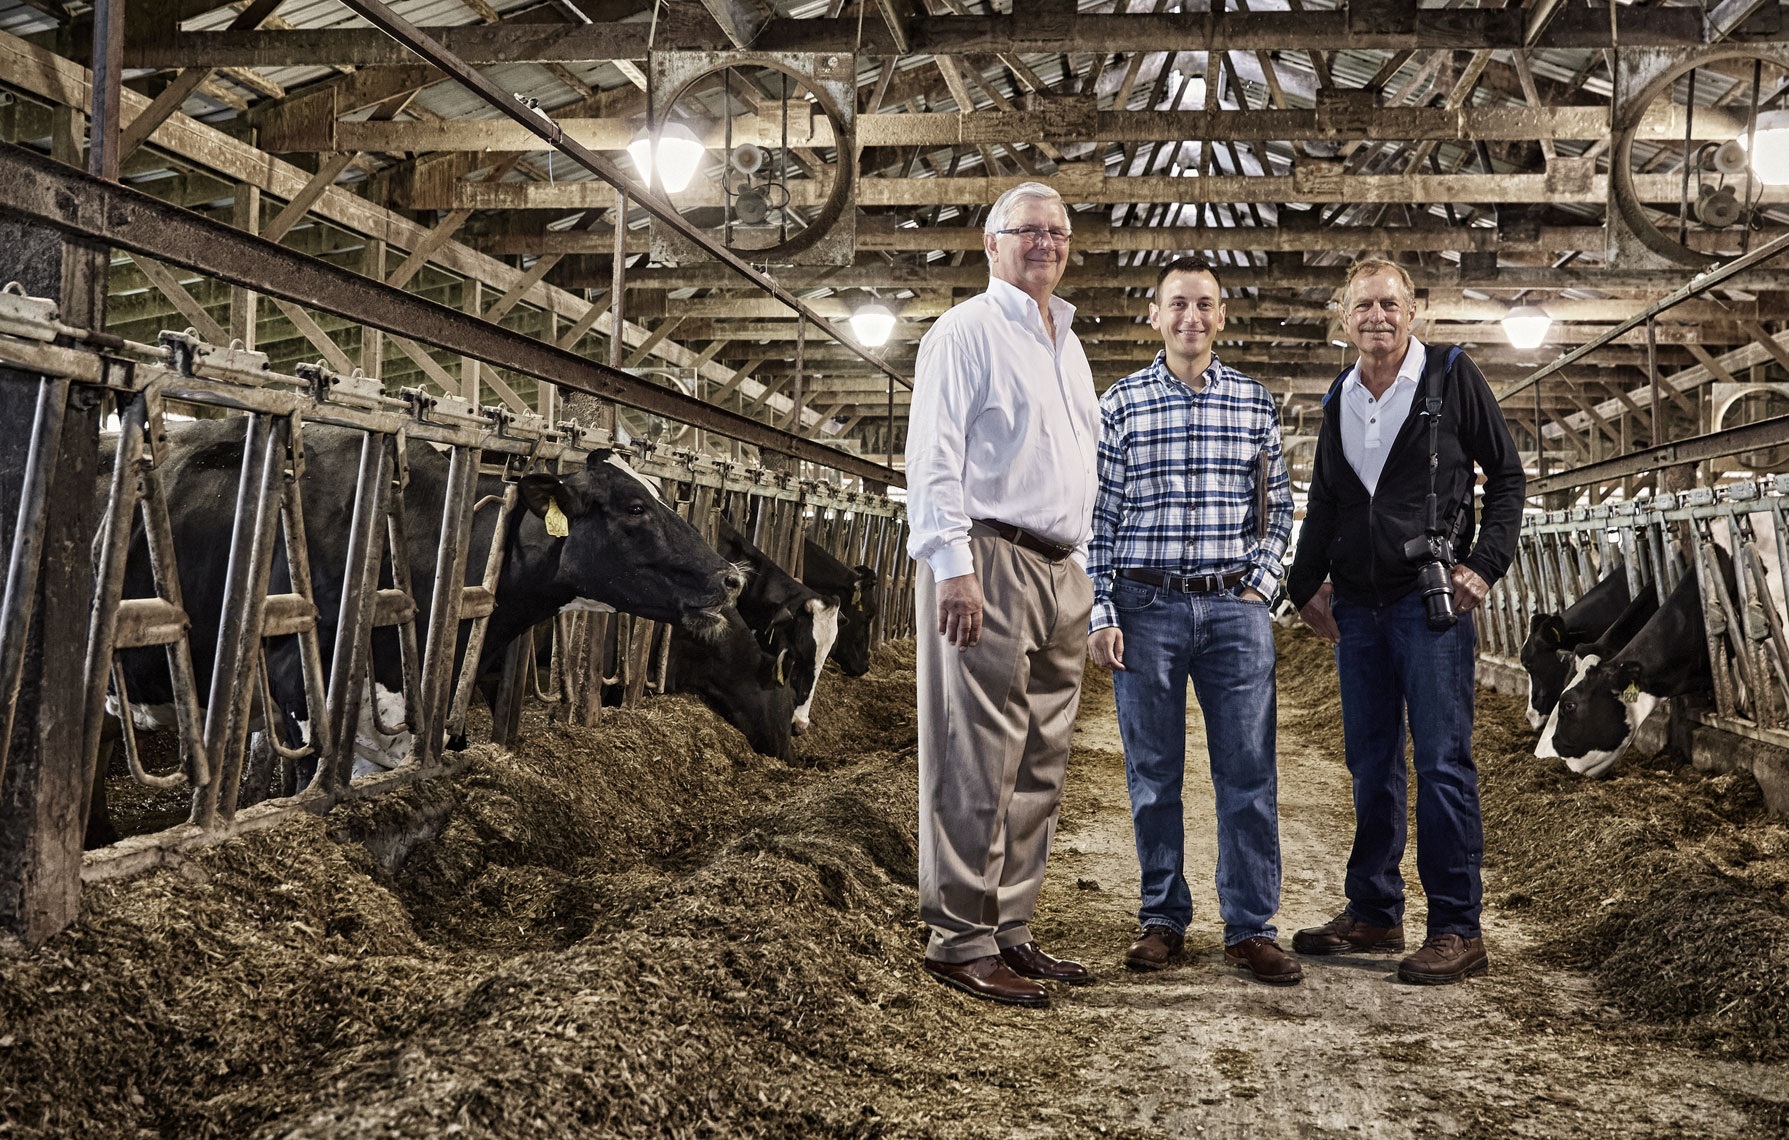 Dairy cows/portrait of bankers/agriculture photography